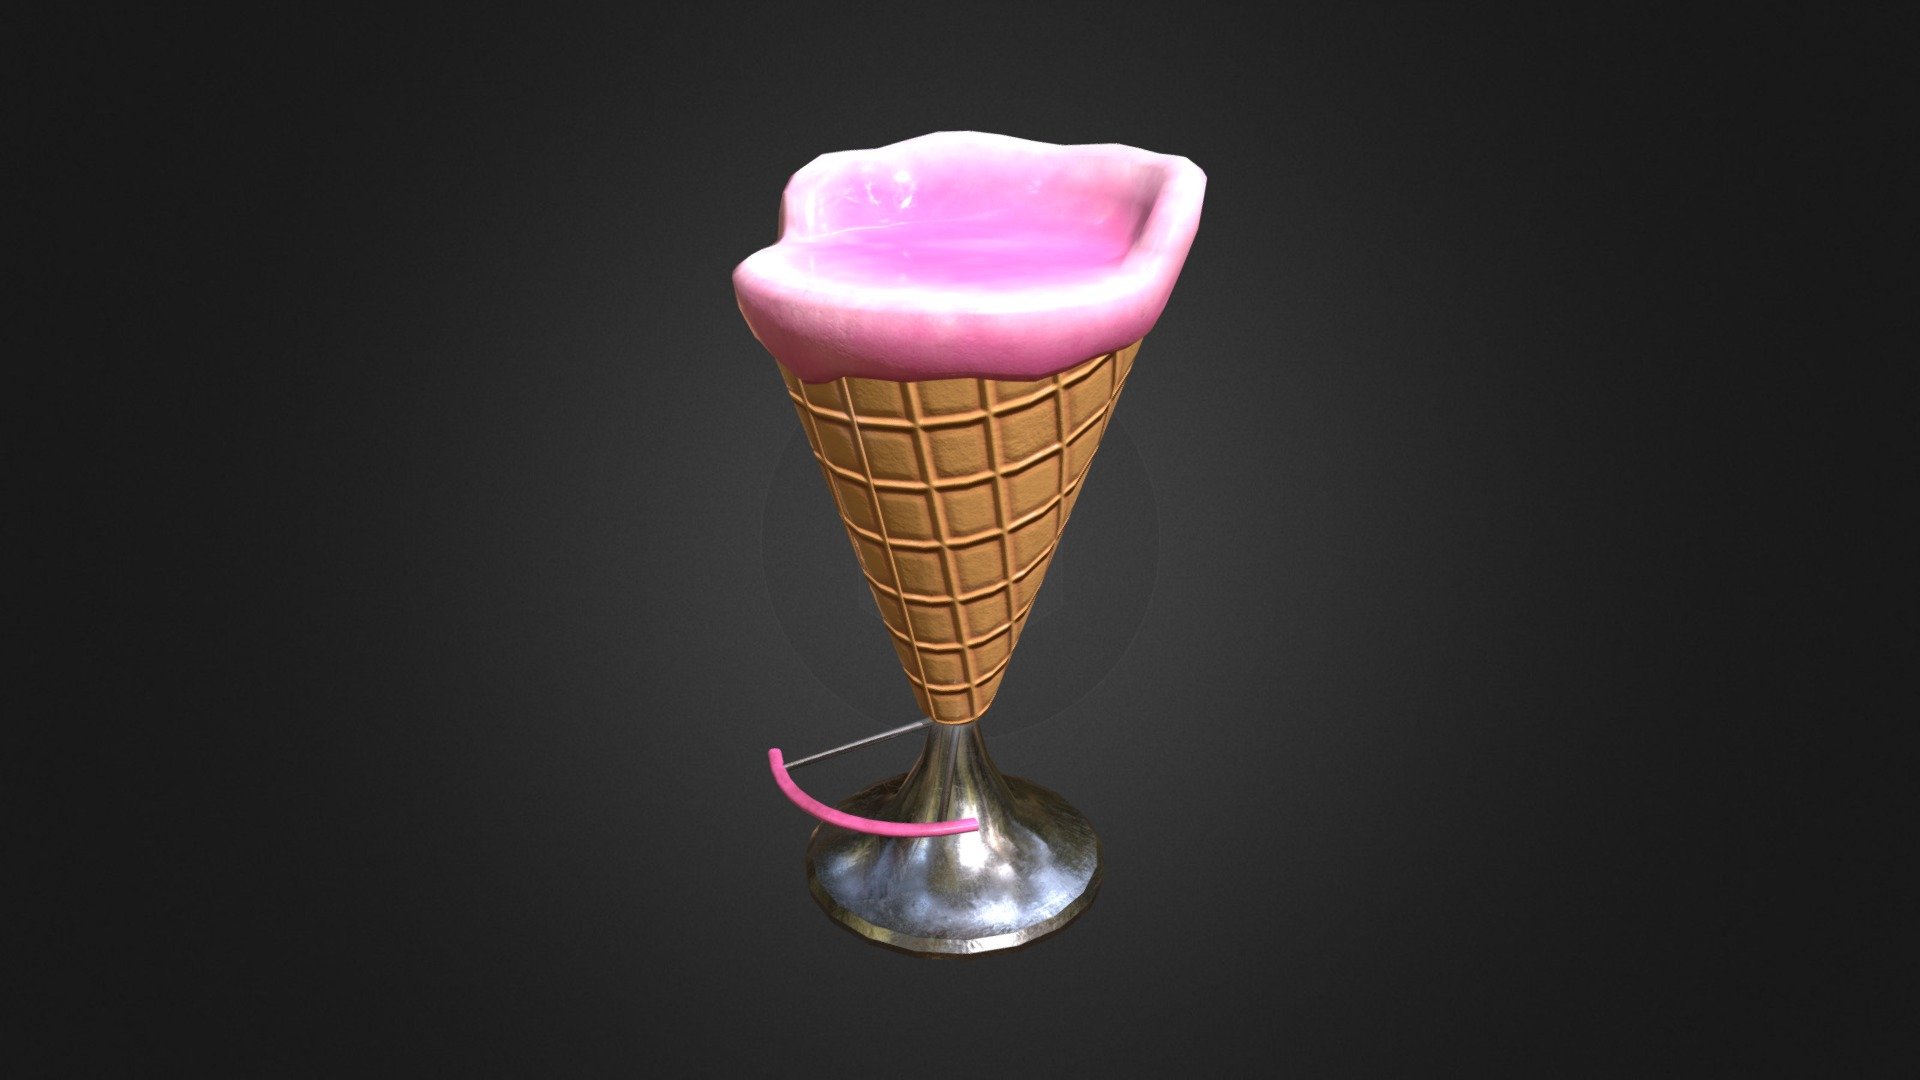 this asset was made for a school project. The game «Don't spread it» takes place in a mall during a pandemic were the player attempts to avoid spreading and contracting an illness - Ice cream seat - 3D model by Gabrielle.Renaud 3d model